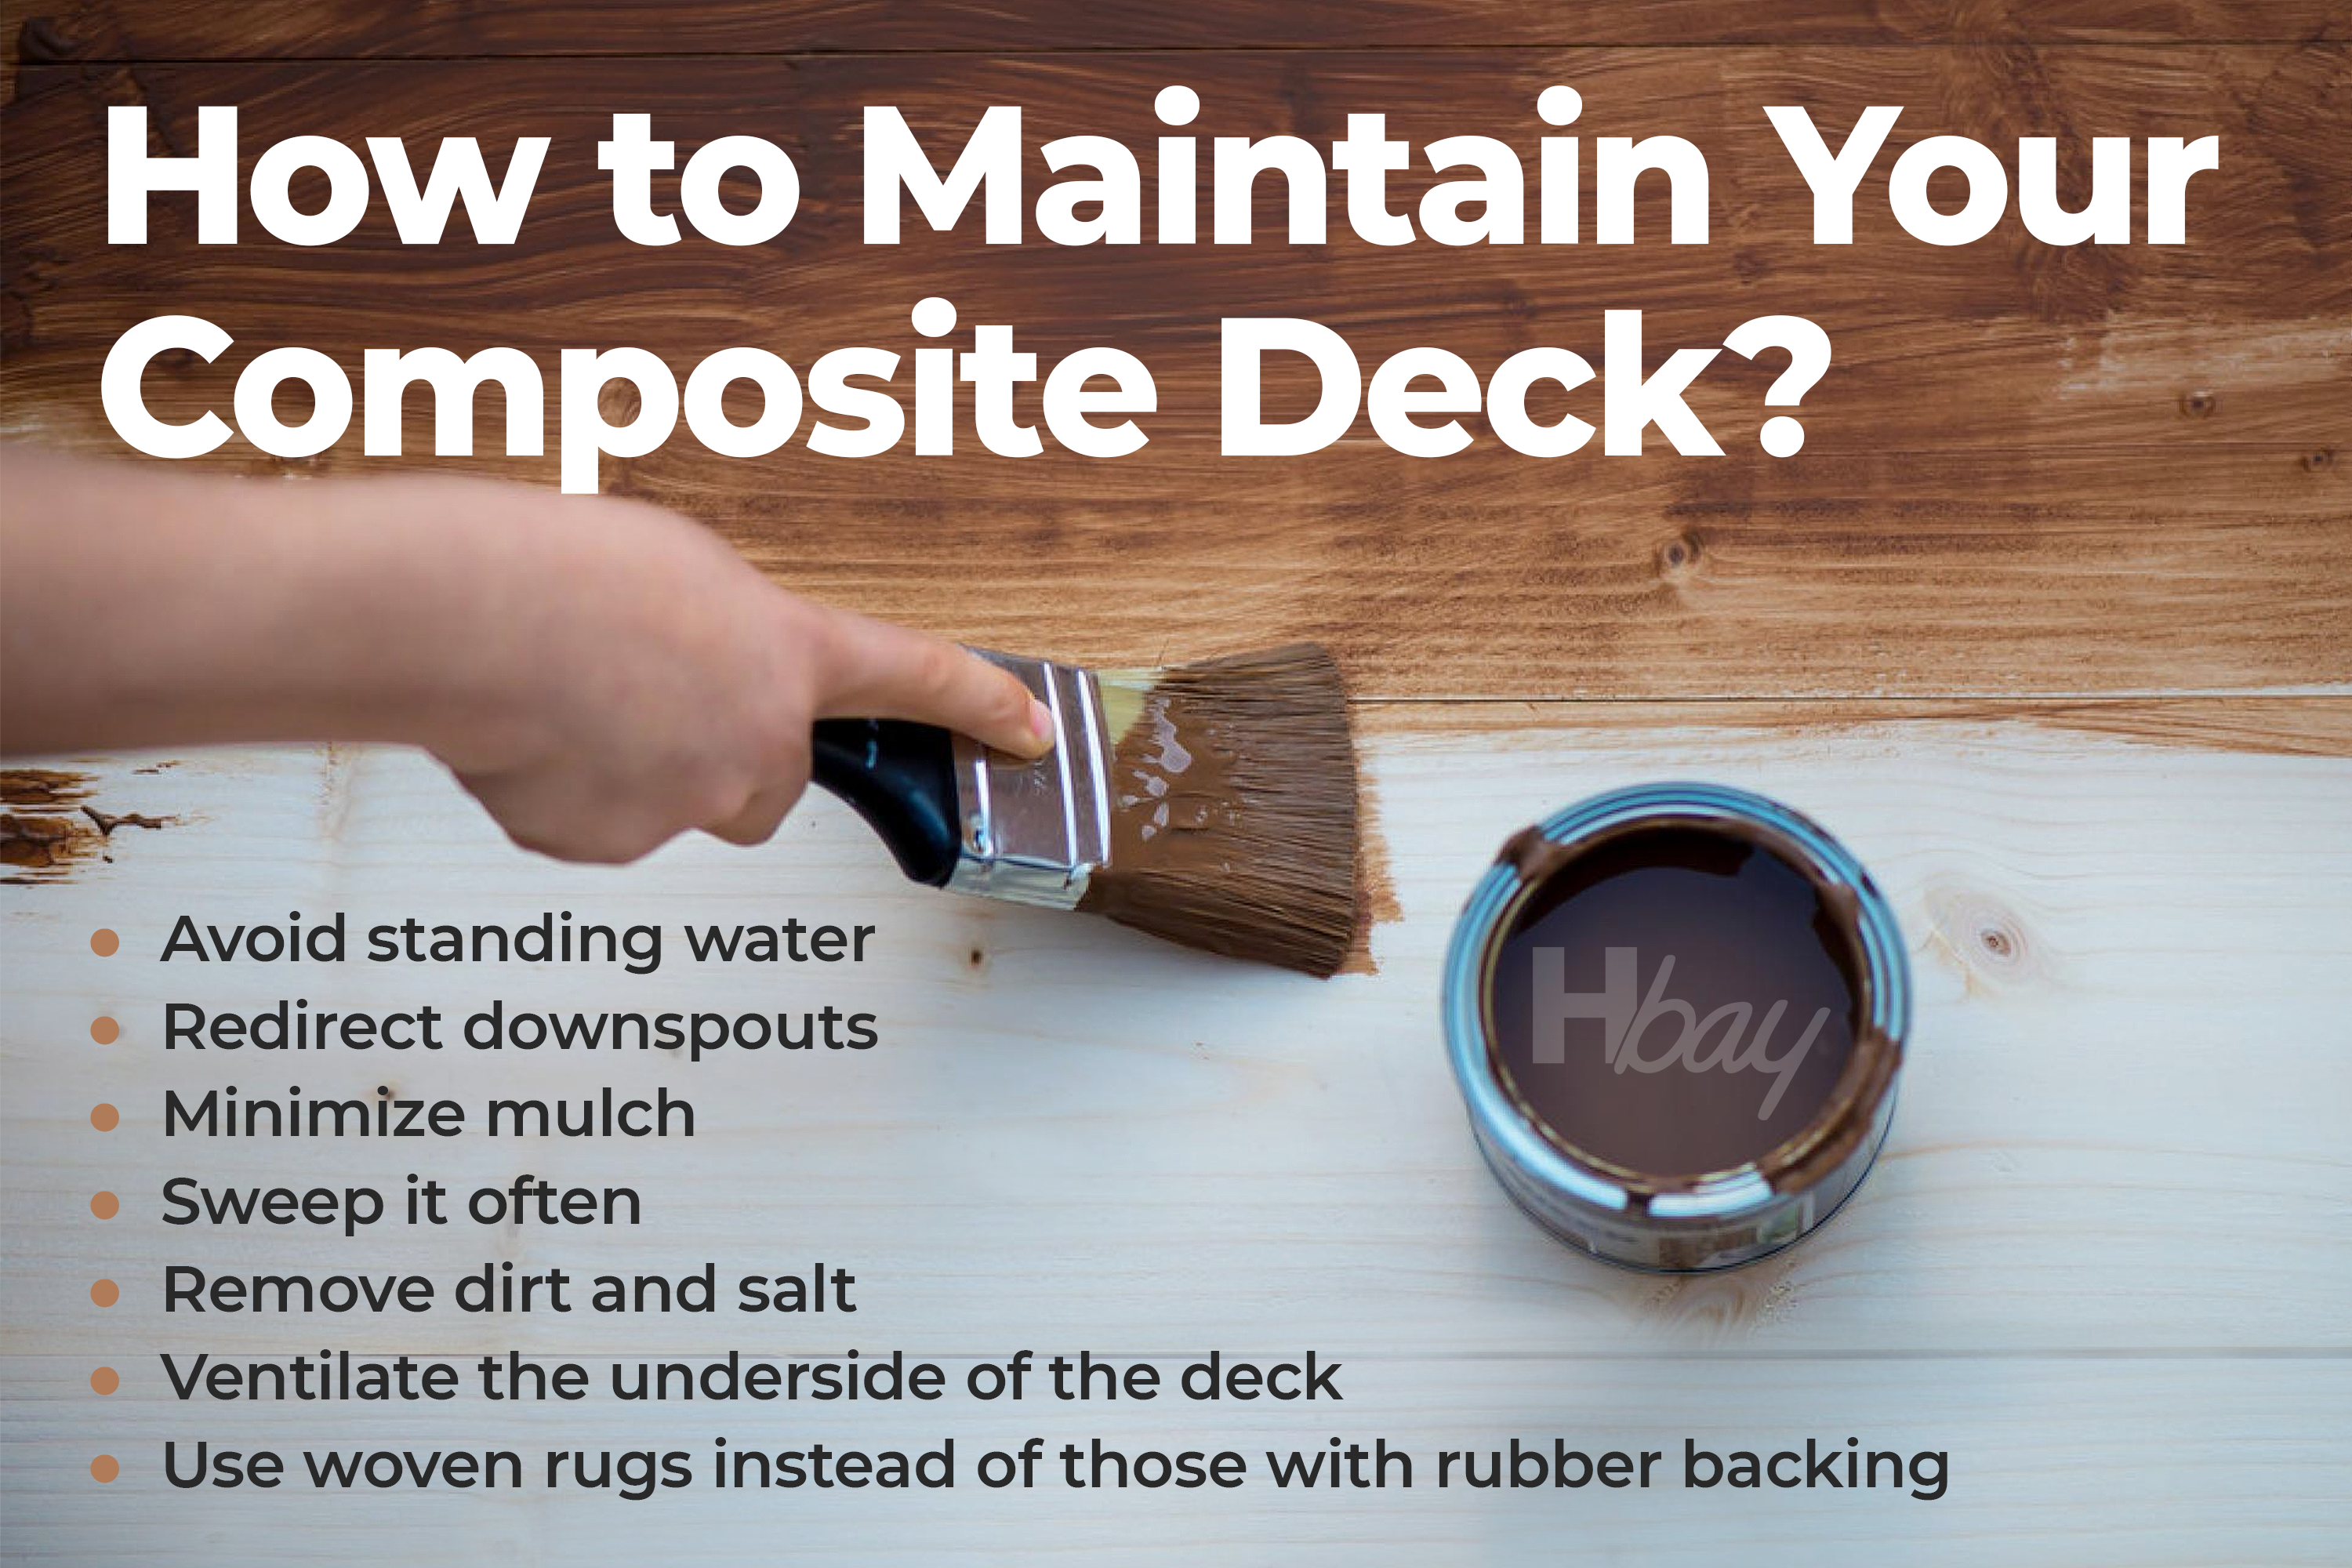 How to Maintain Your Composite Deck